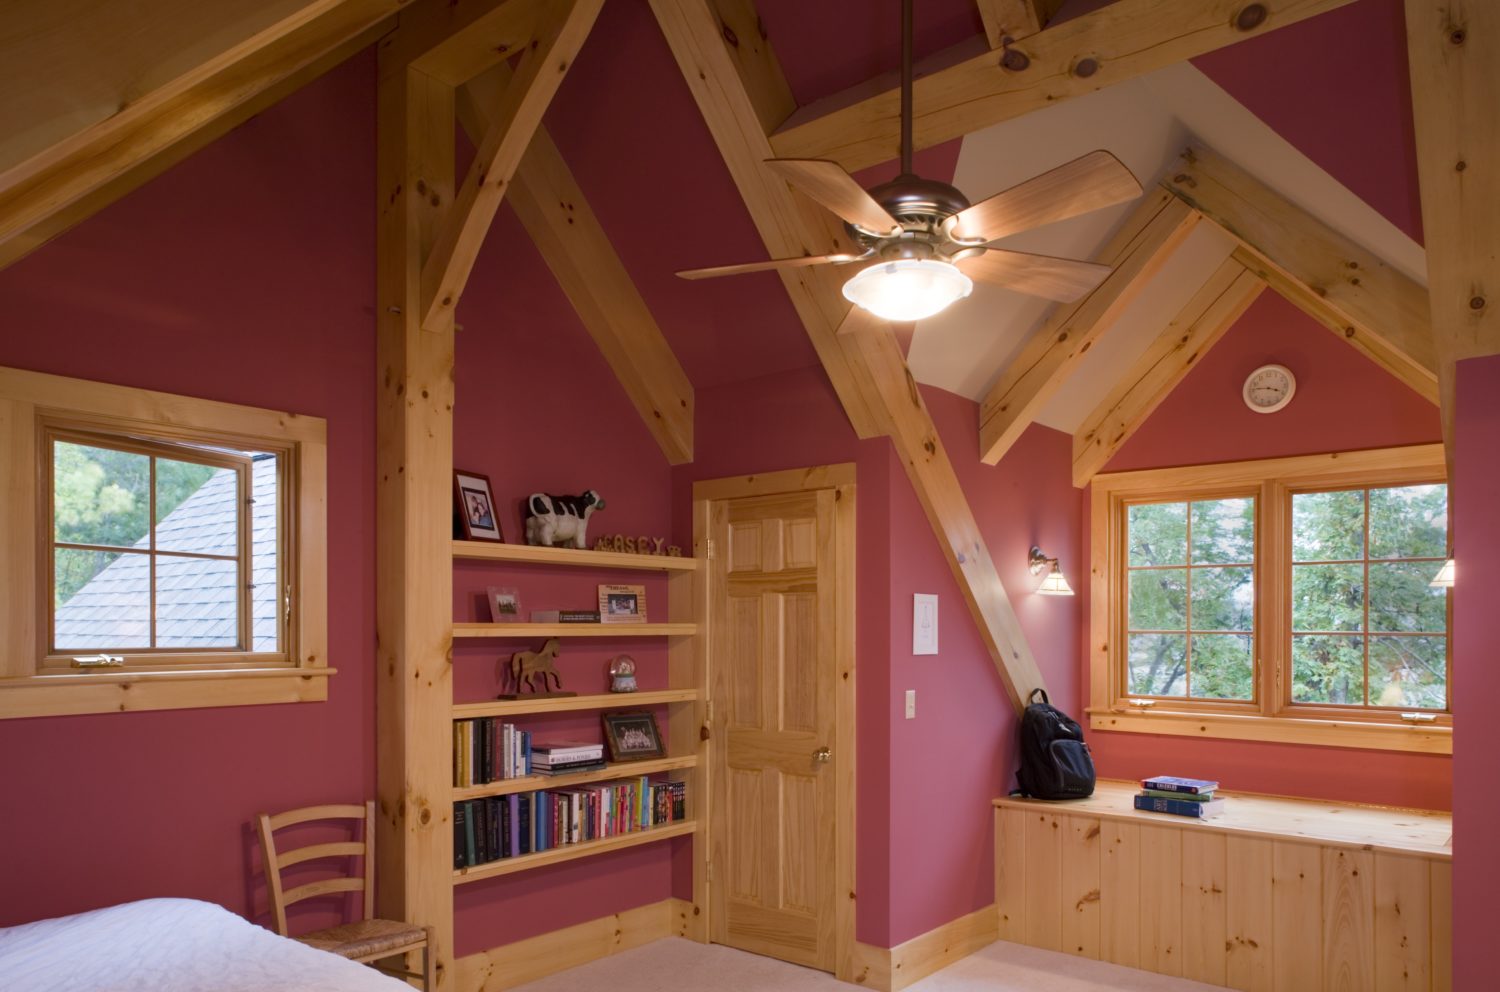 Designing Storage Space in Timber Frame Homes